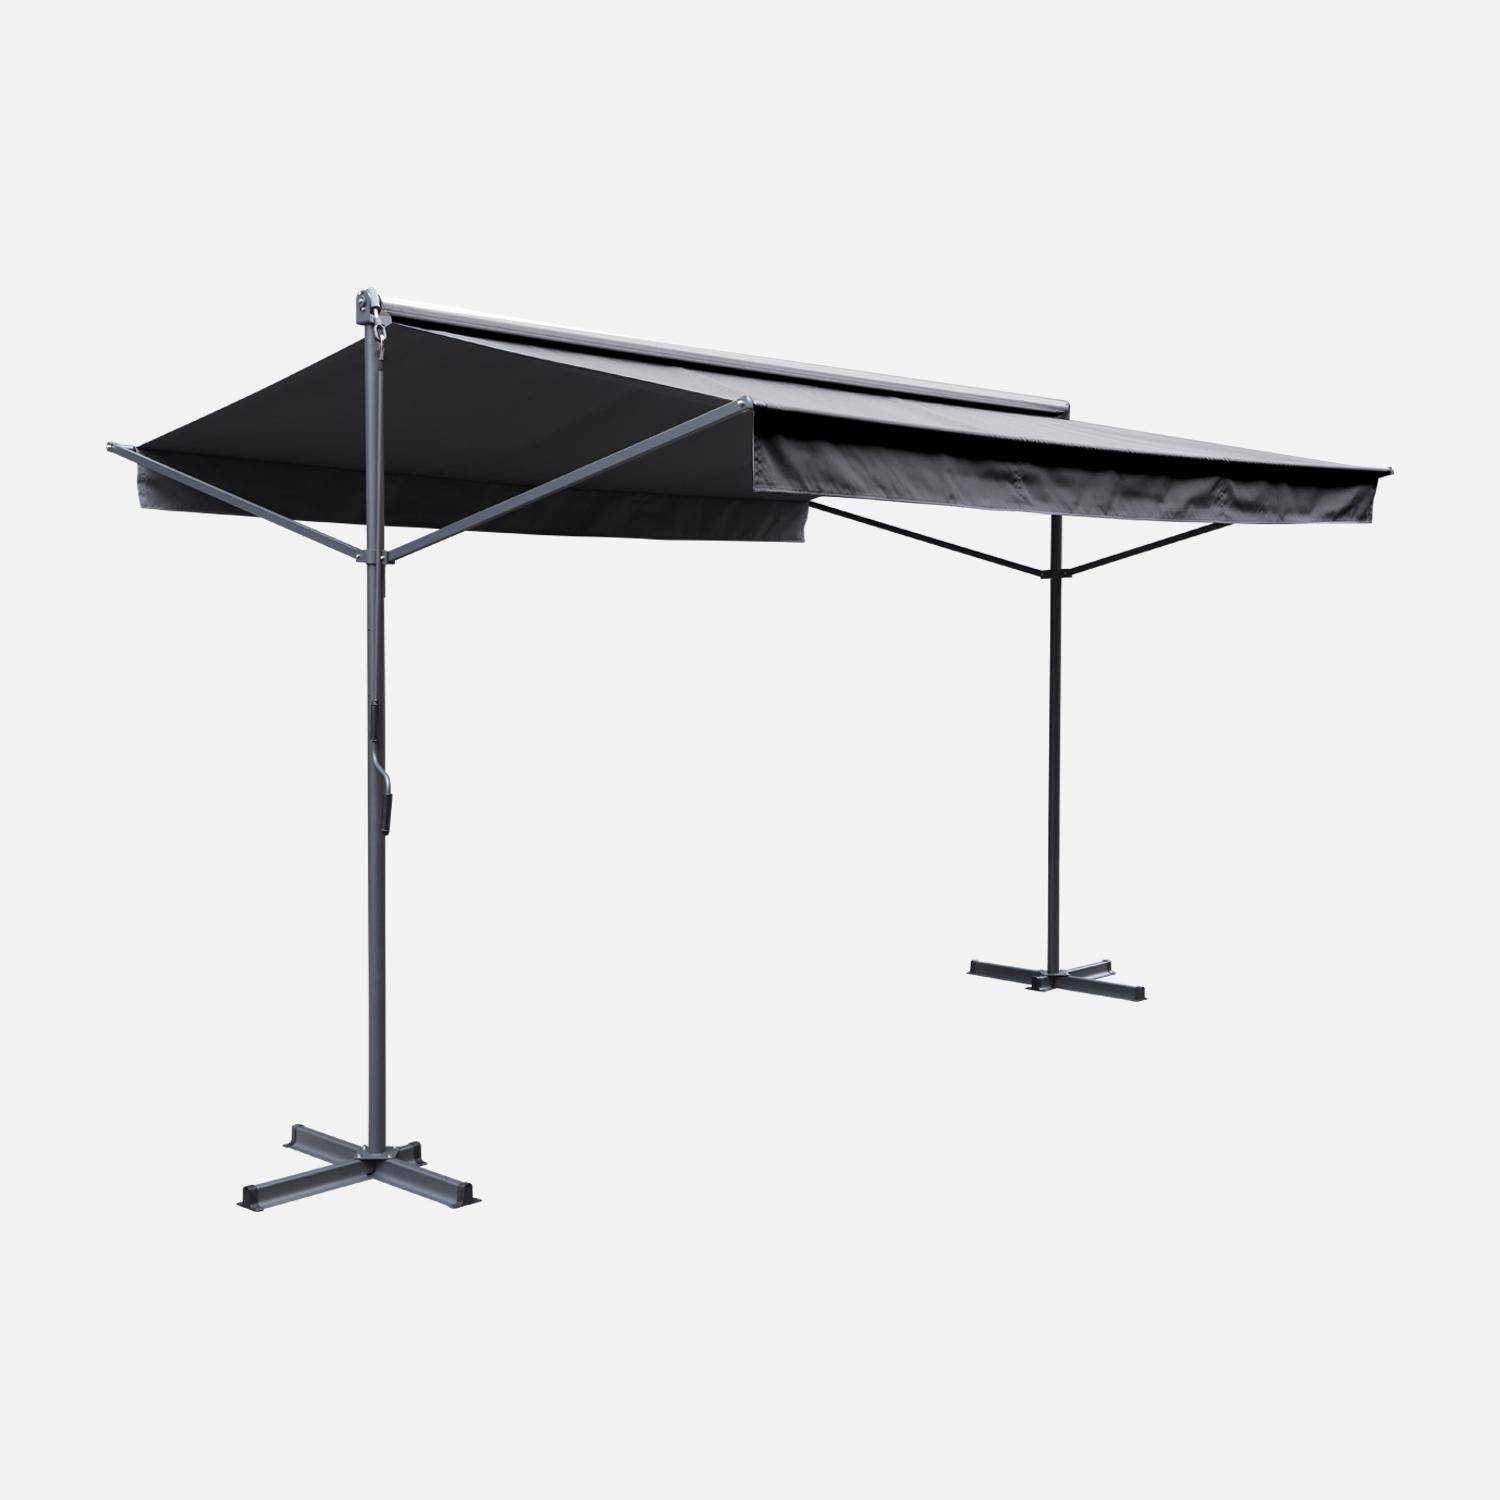 Rectractable patio awning - Manual crank system, freestanding awning, coated polyester canvas - Penne 4x3m - Grey,sweeek,Photo1